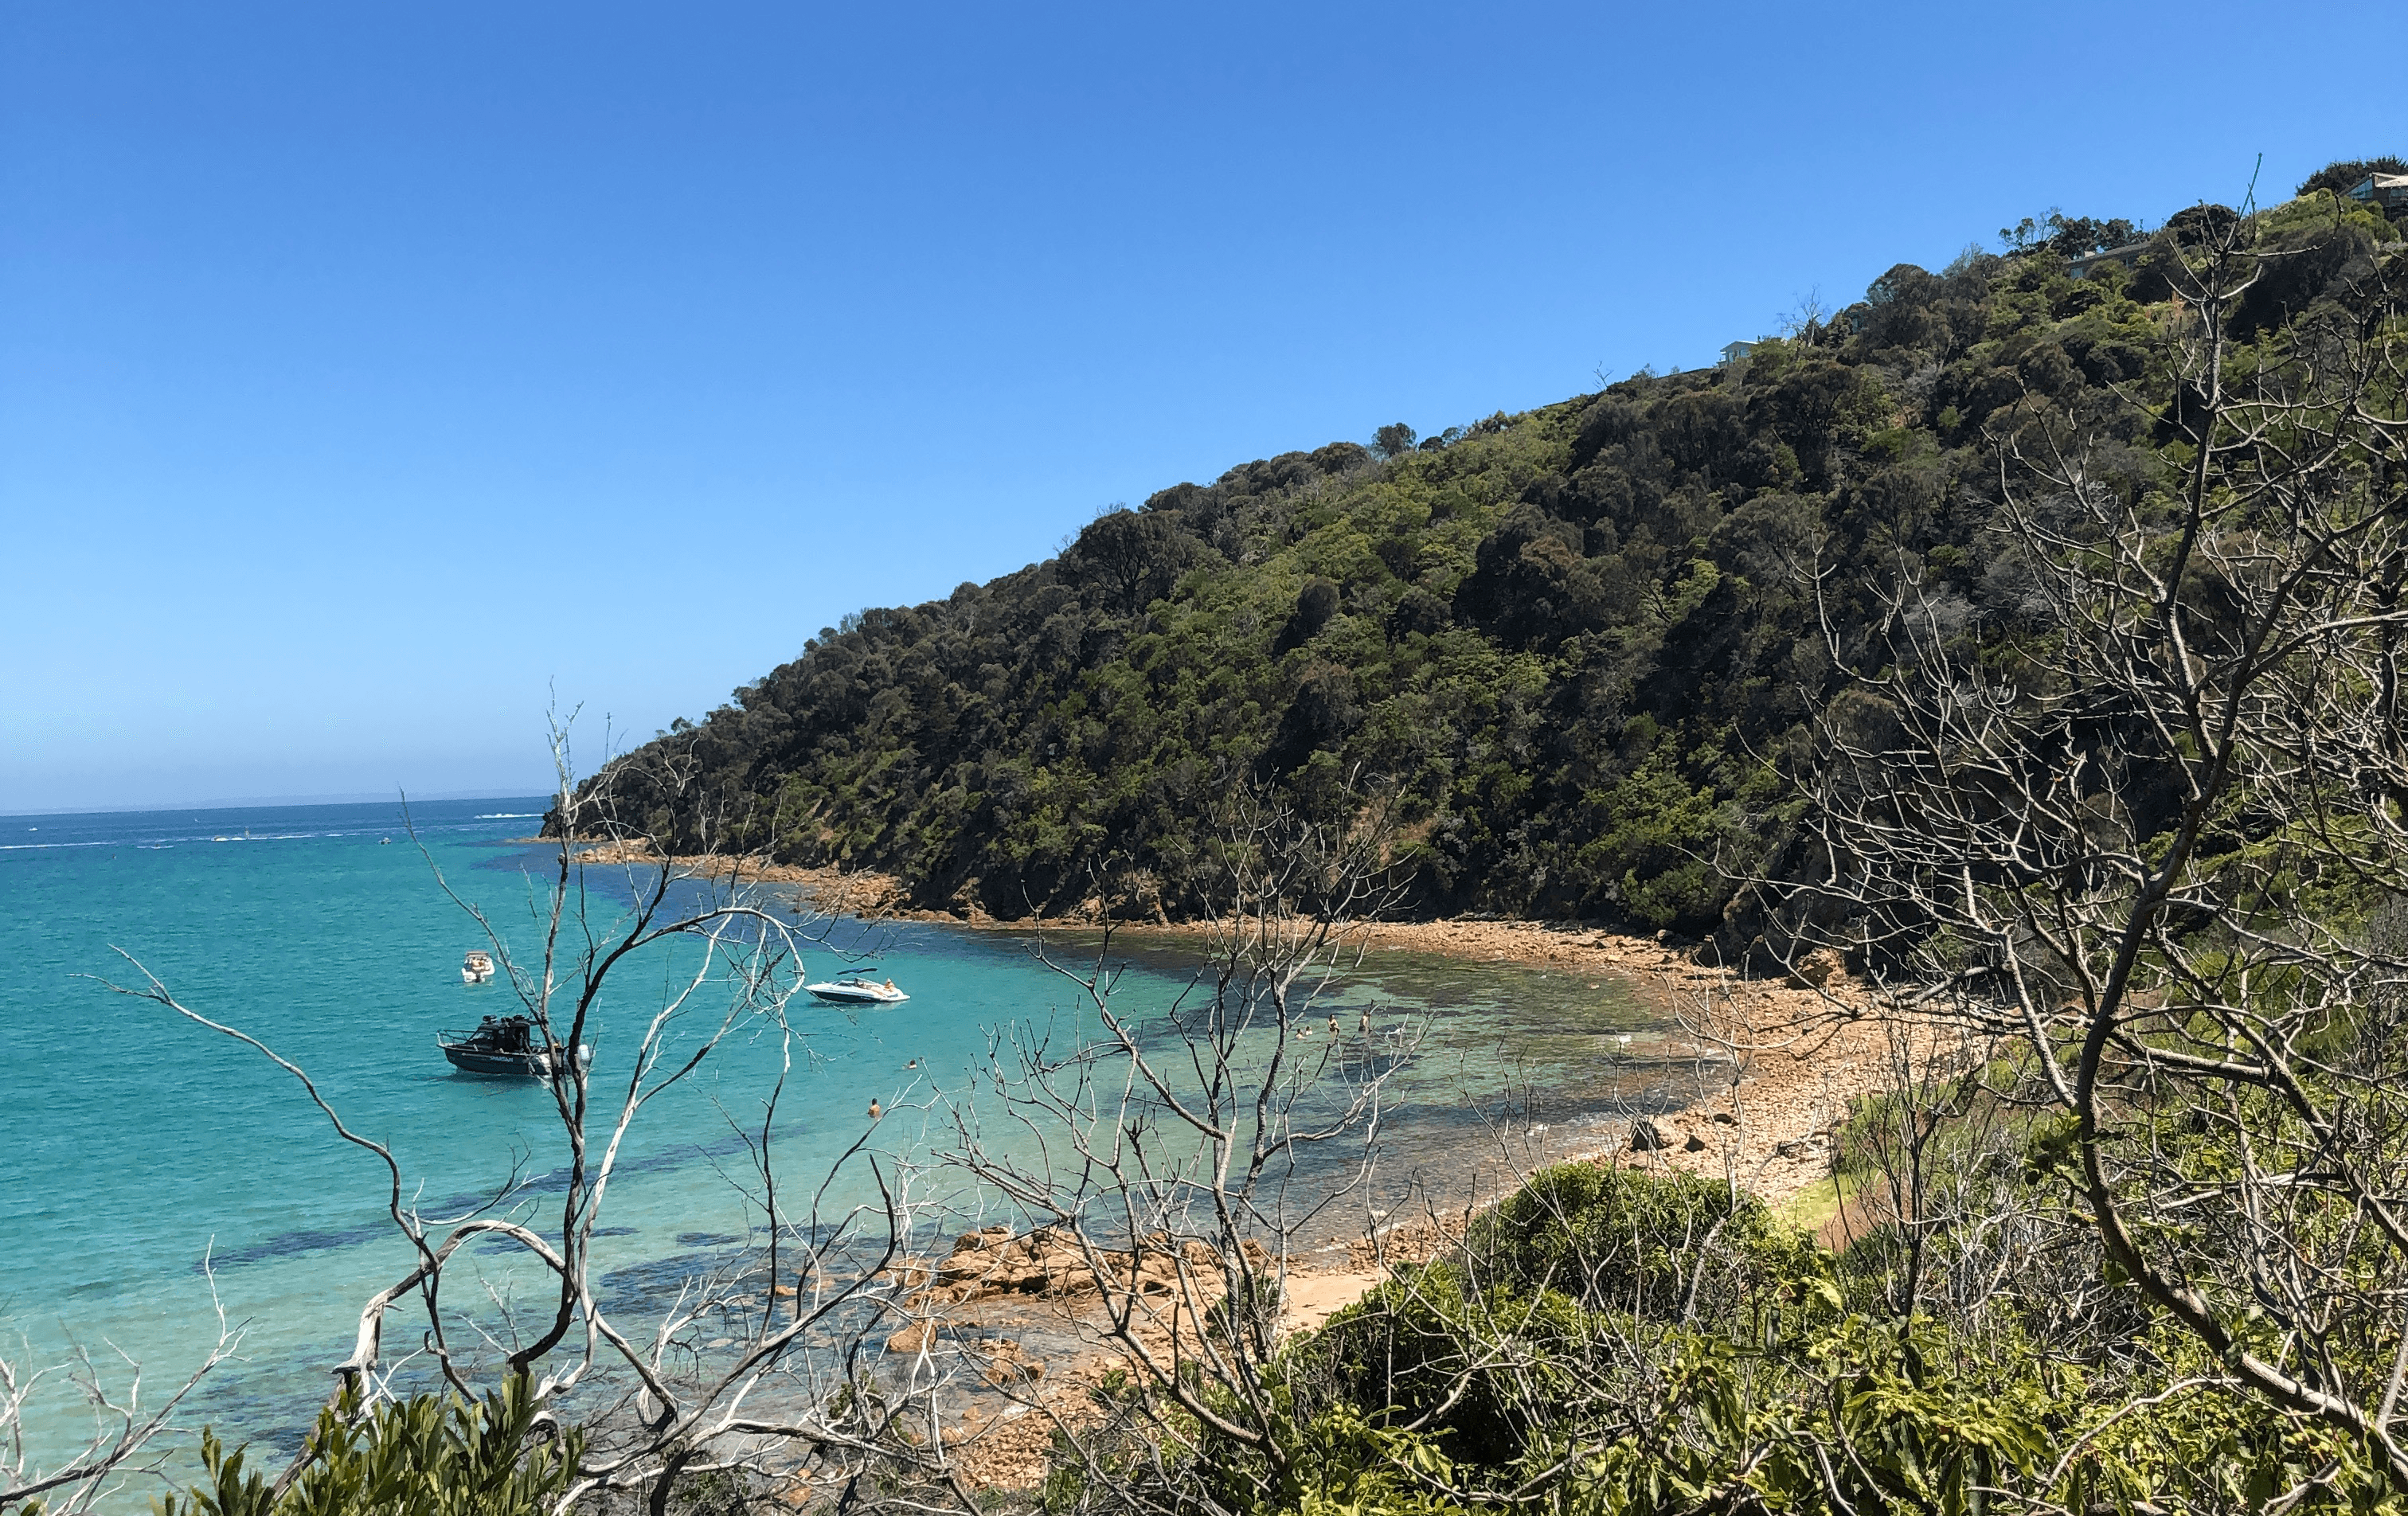 A small cove with blue water at one of the best beaches in Victoria.